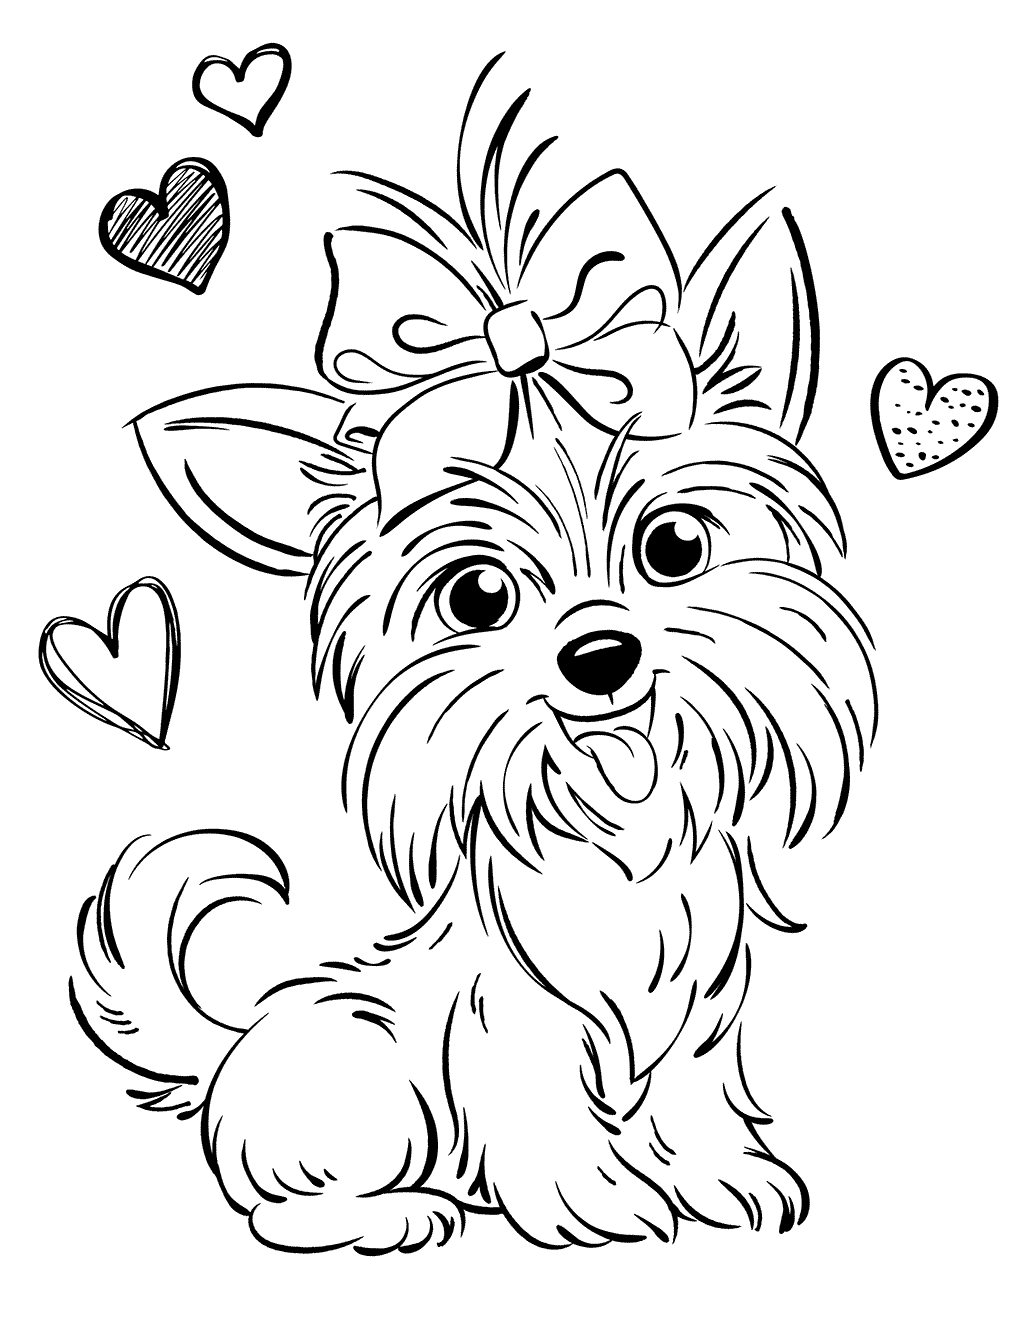 The dog Bow Bow of Jojo Siwa with hearts Coloring Page Free Printable